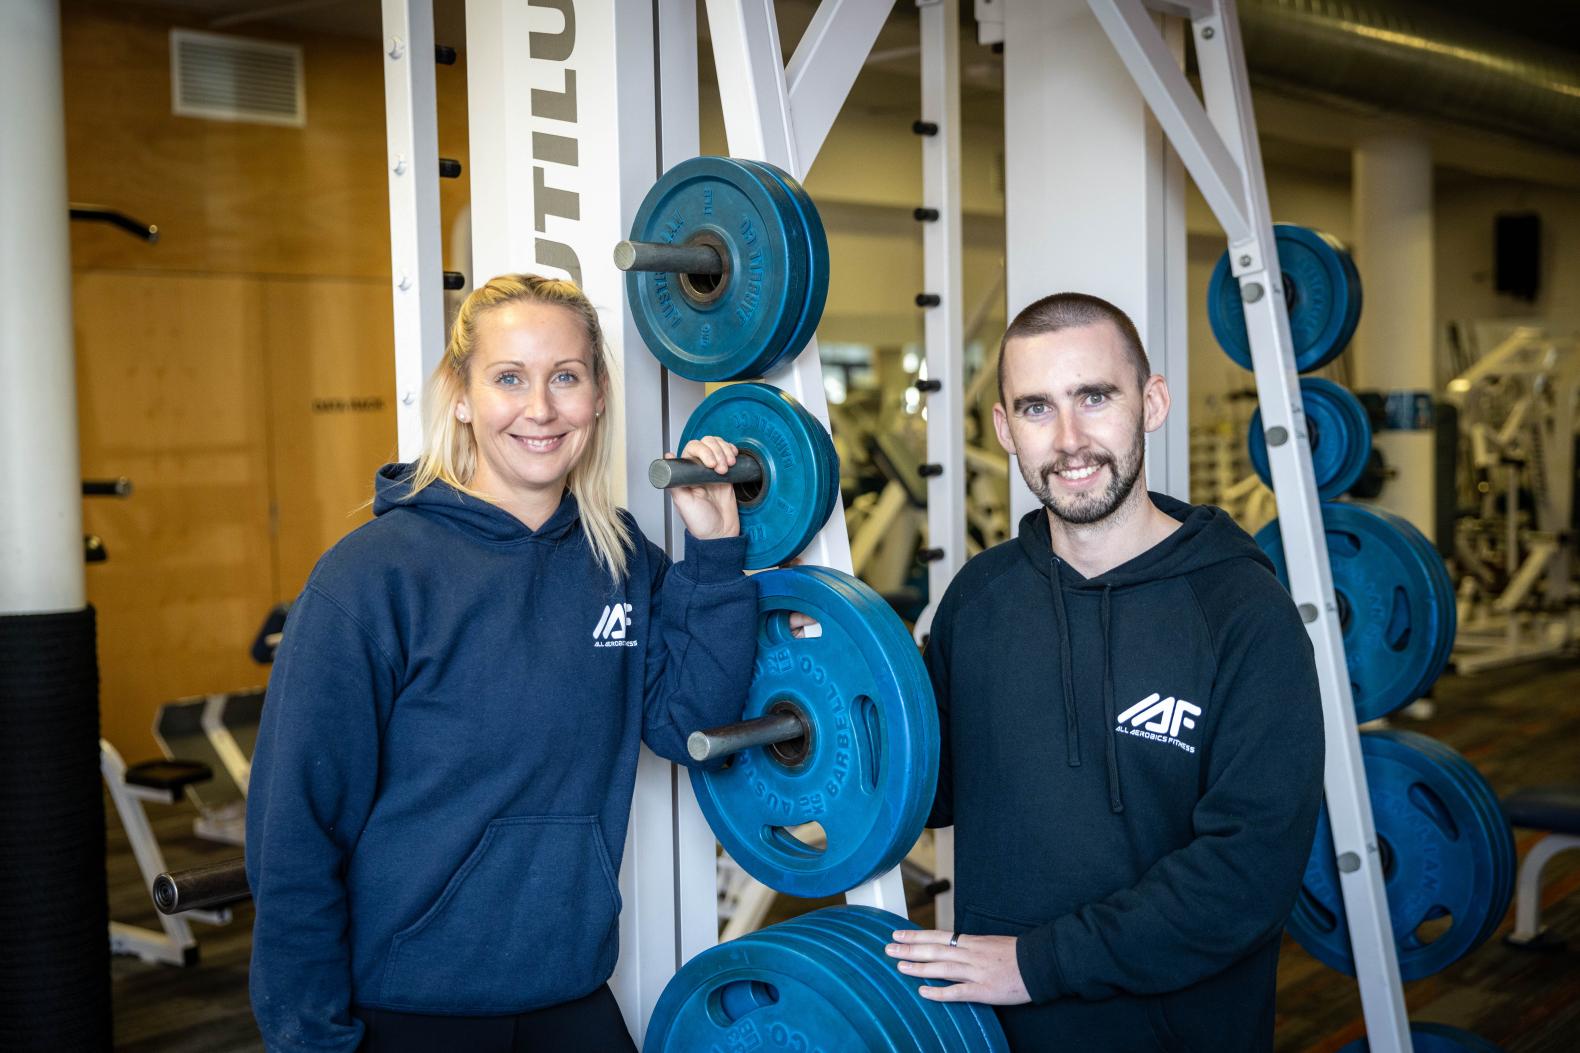 Meet our Personal Training Team